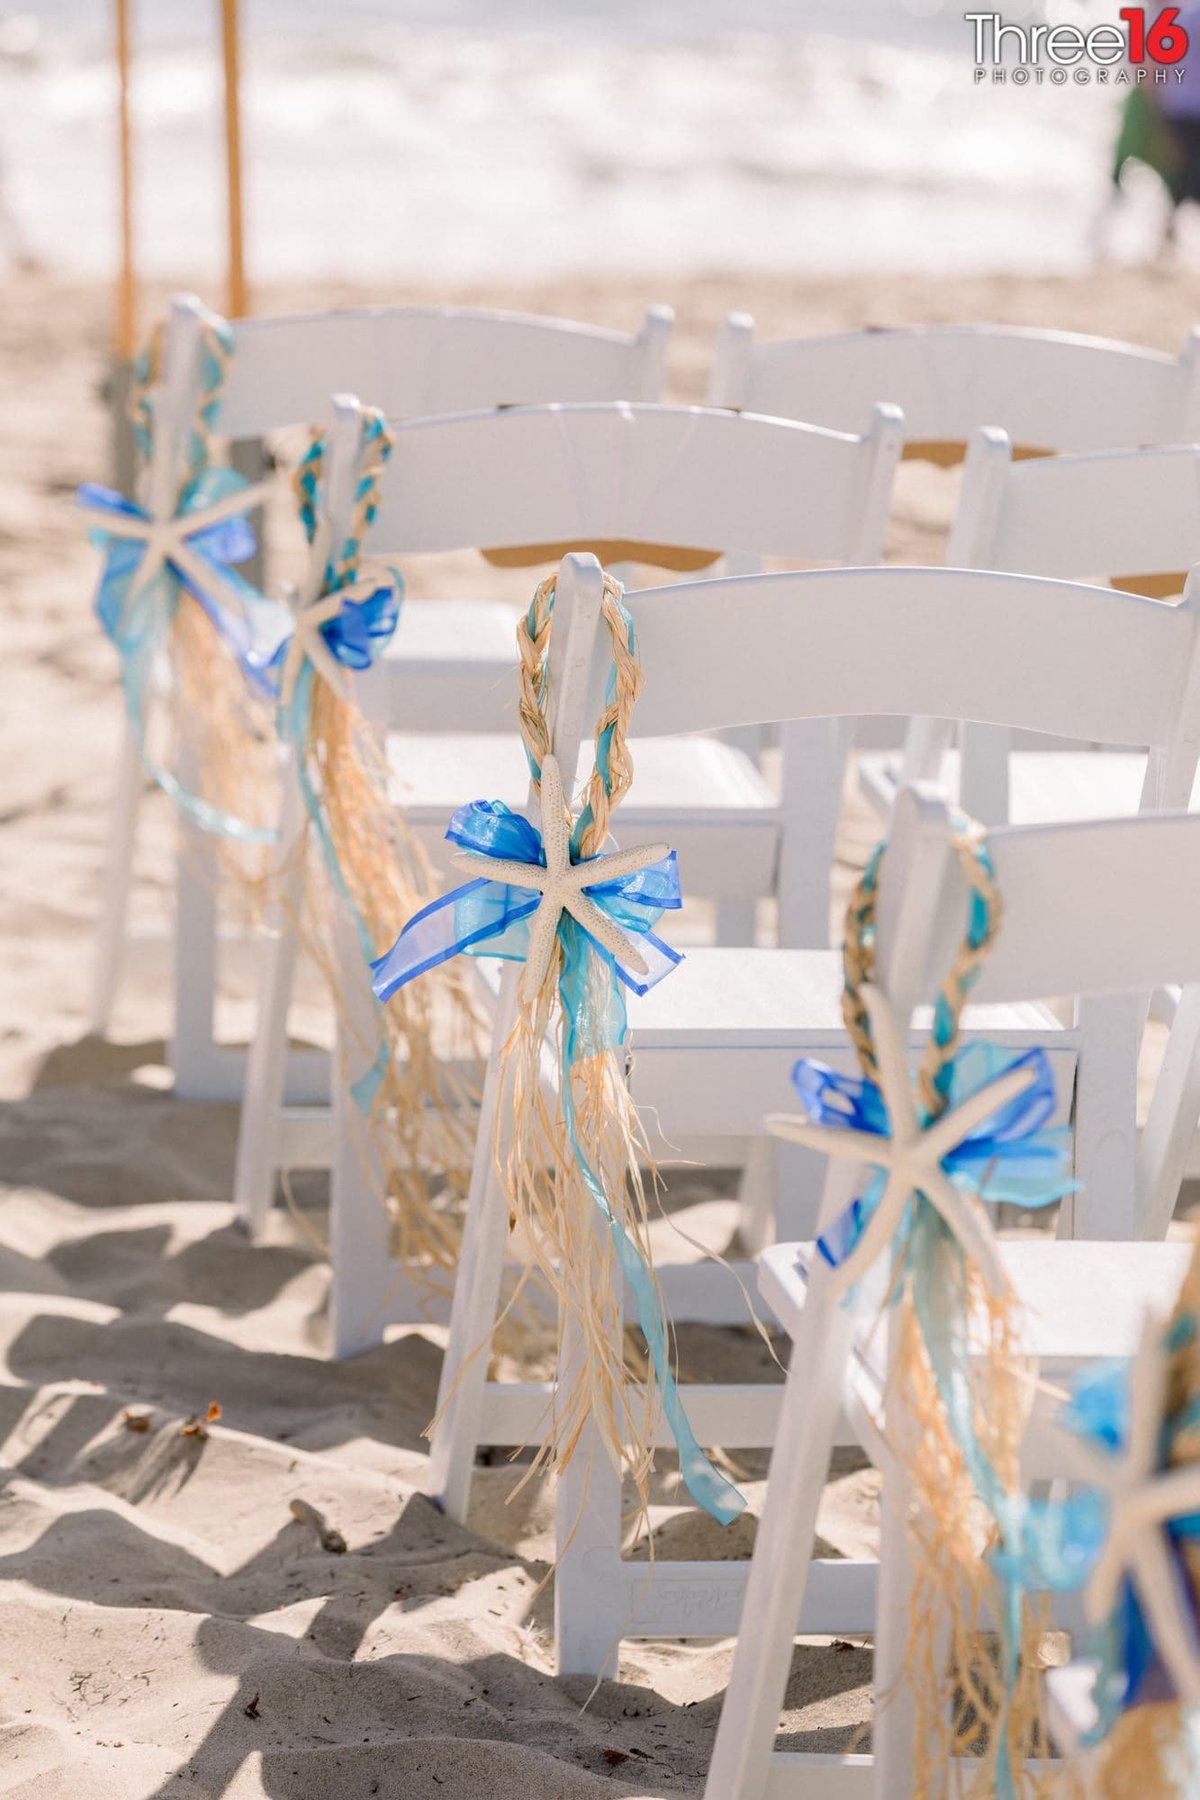 Beautiful seaside decor on the edges of the chairs